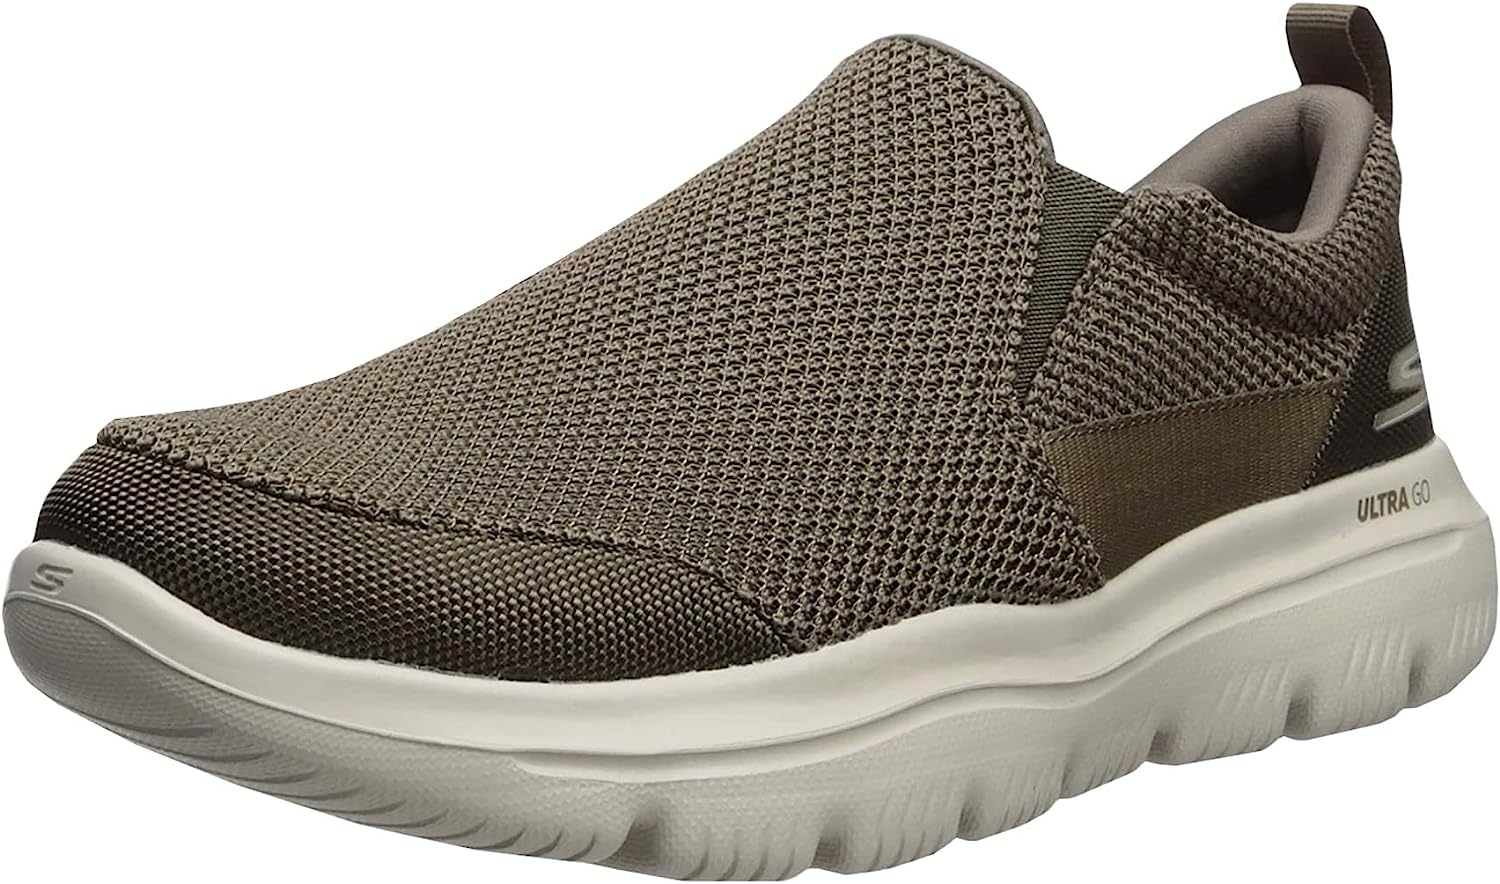 mens slip on shoes detailed review